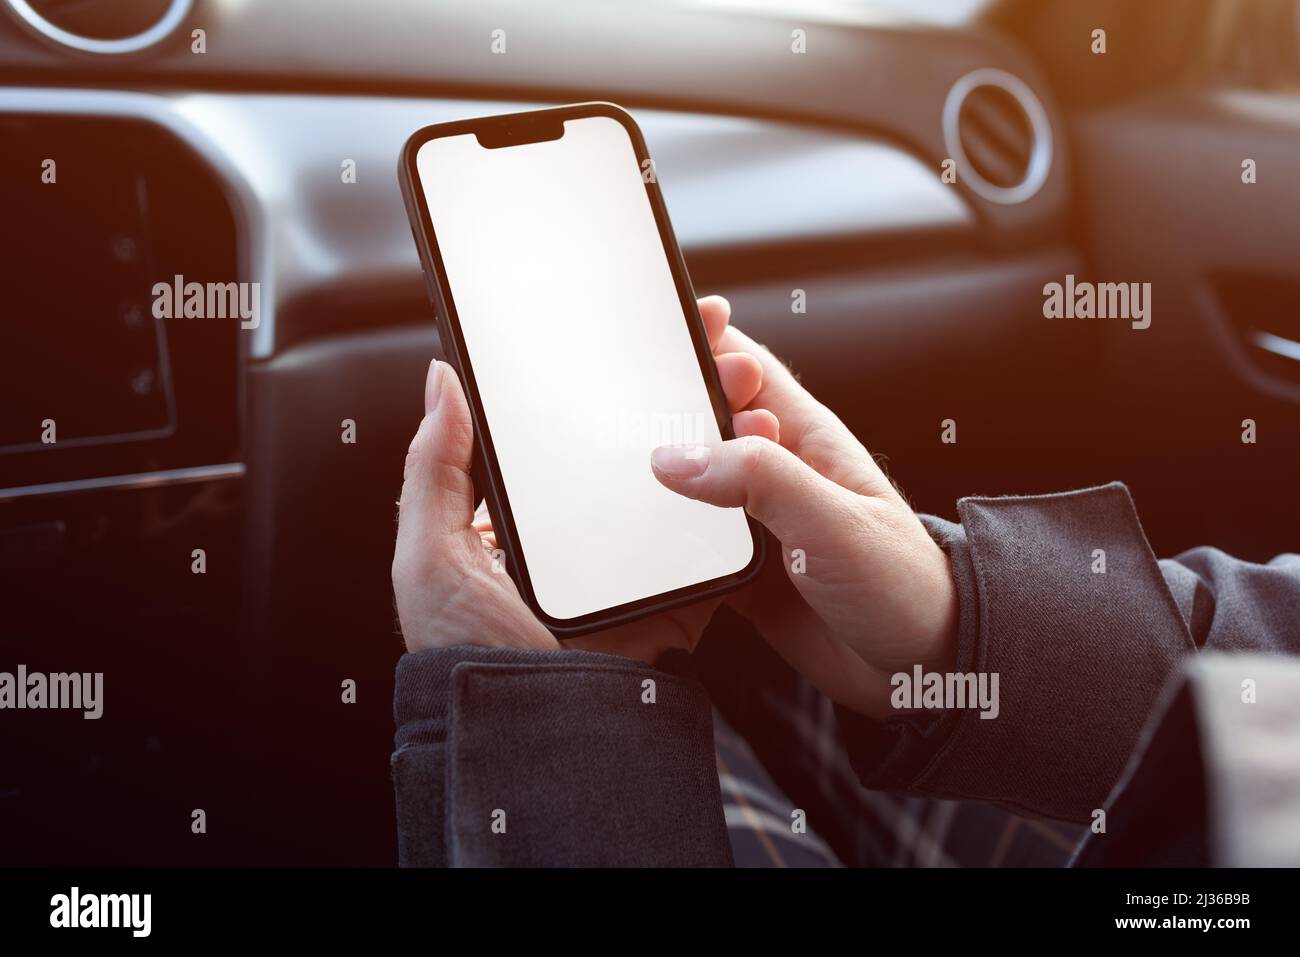 Female passenger in the car using mobile phone with blank white screen as mockup copy space, selective focus Stock Photo